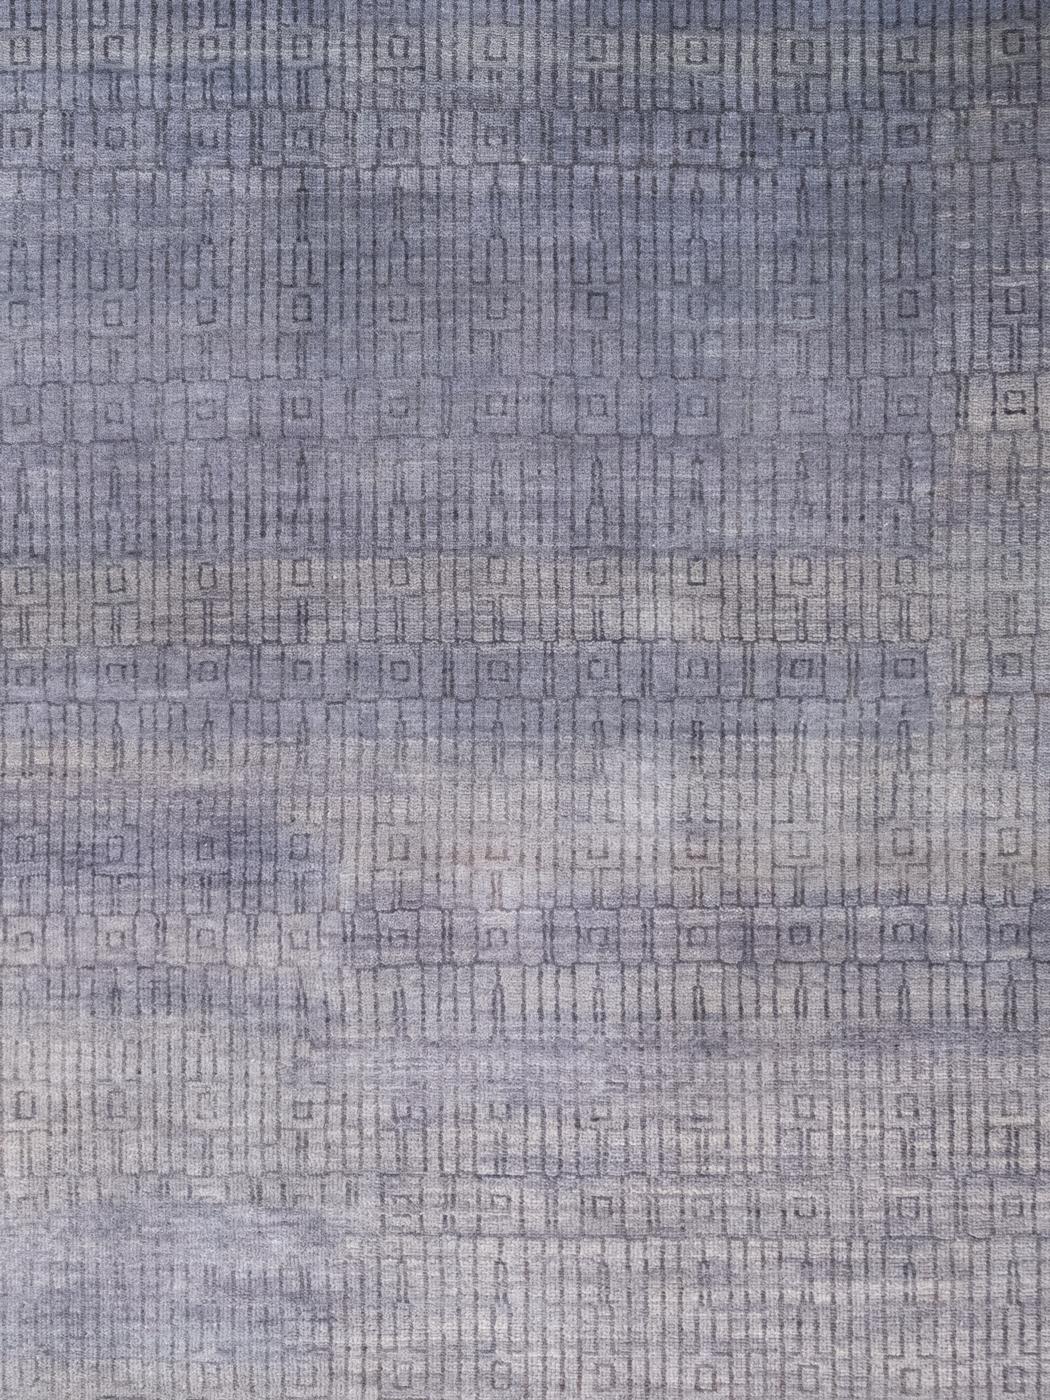 Persian Orley Shabahang, Gray Modern Architectural Carpet, Wool, Hand-Knotted, 9' x 12' For Sale